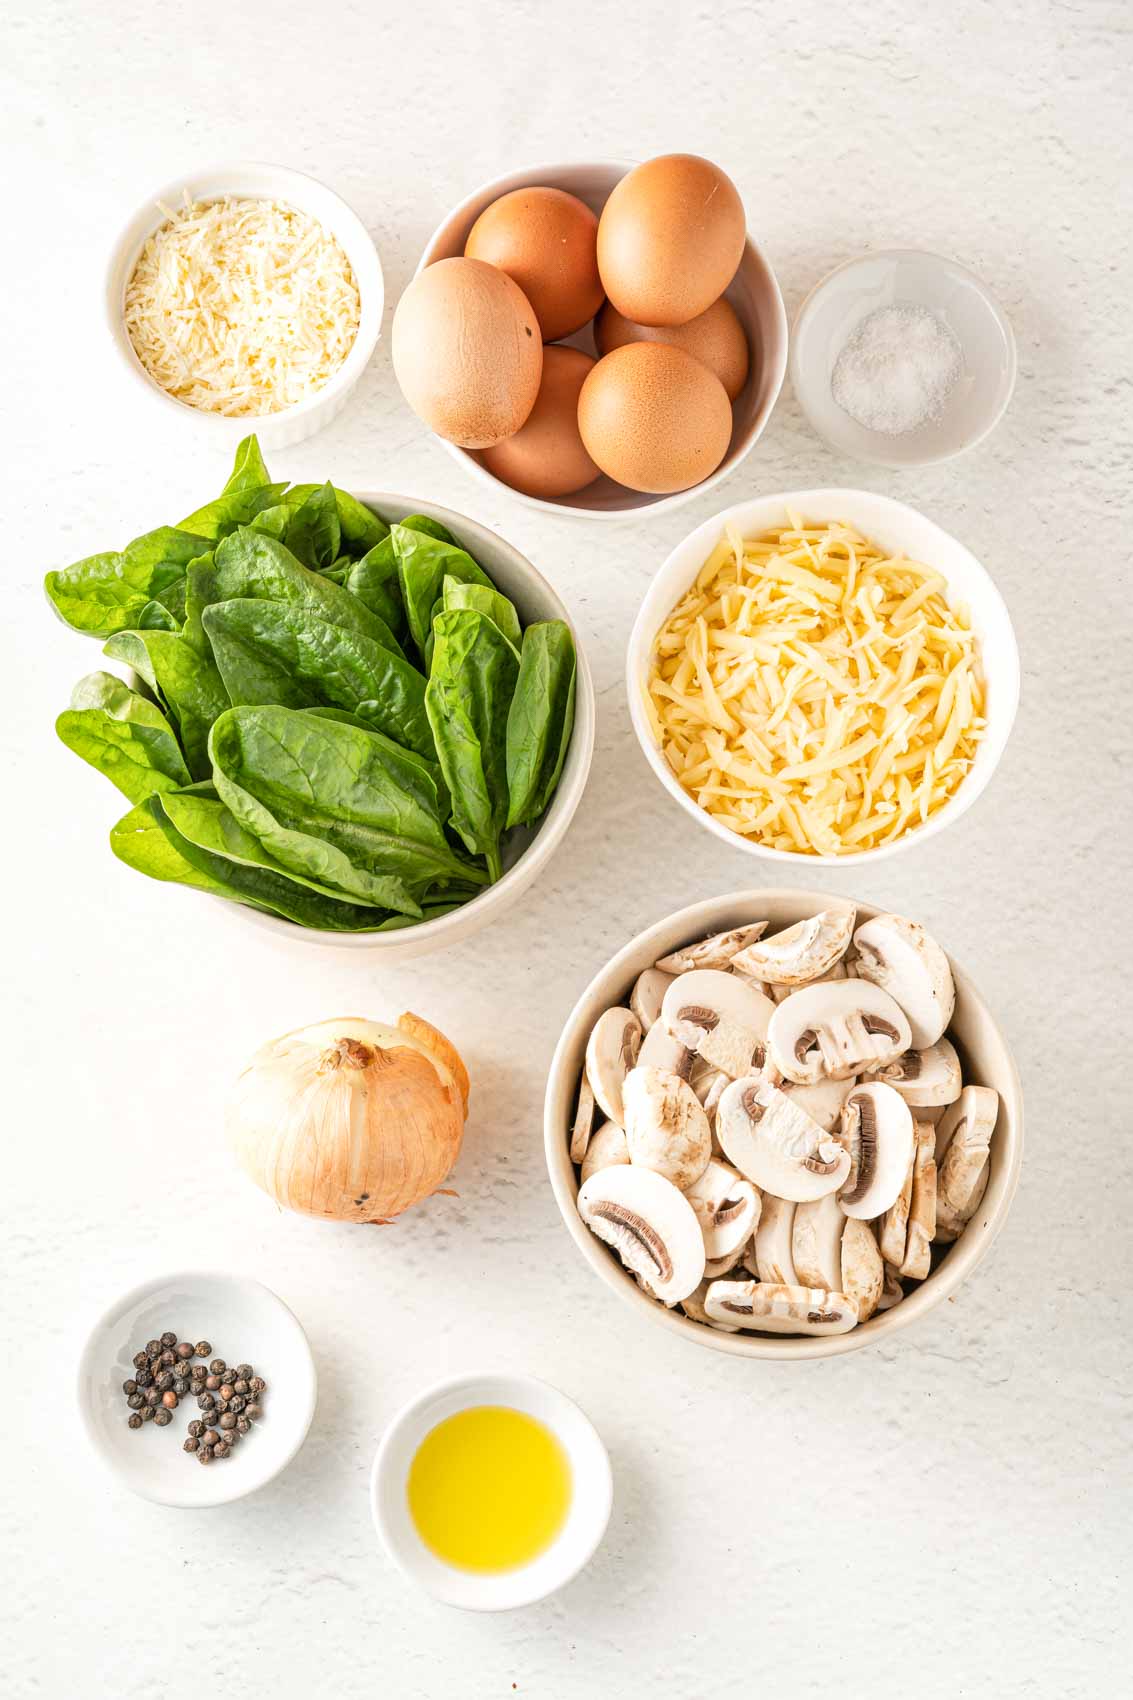 ingredients for spinach mushroom frittata recipe, including white mushrooms, fresh spinach, cheese, onion, salt, pepper and olive oil